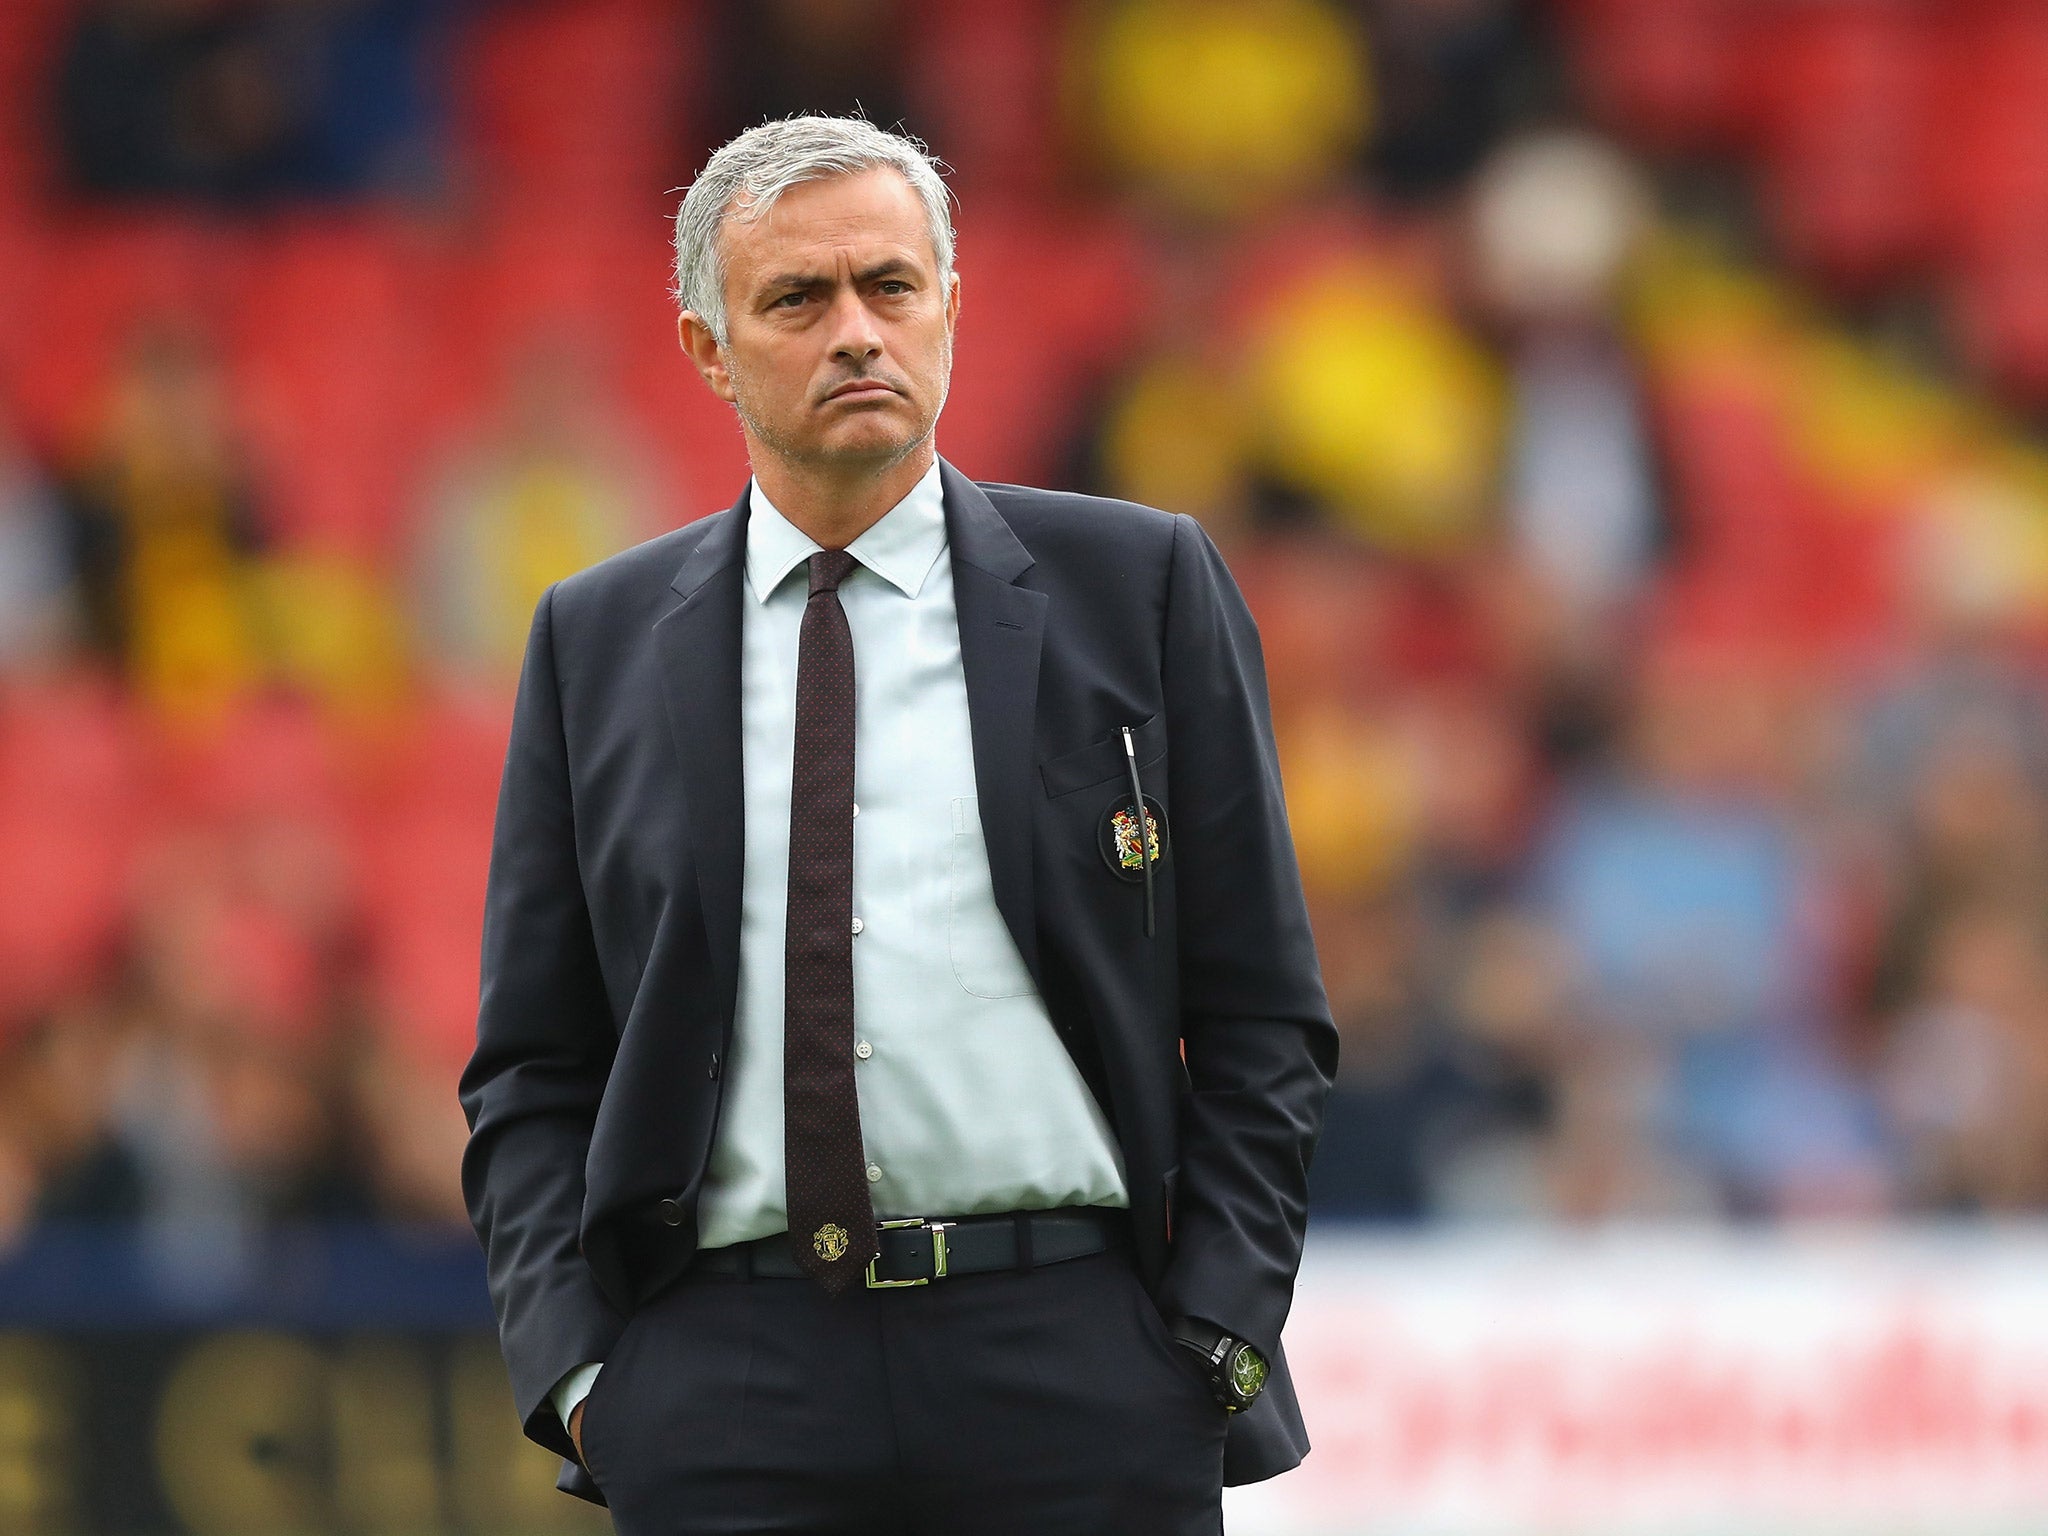 Jose Mourinho is displaying unfamiliar weaknesses in his management this season